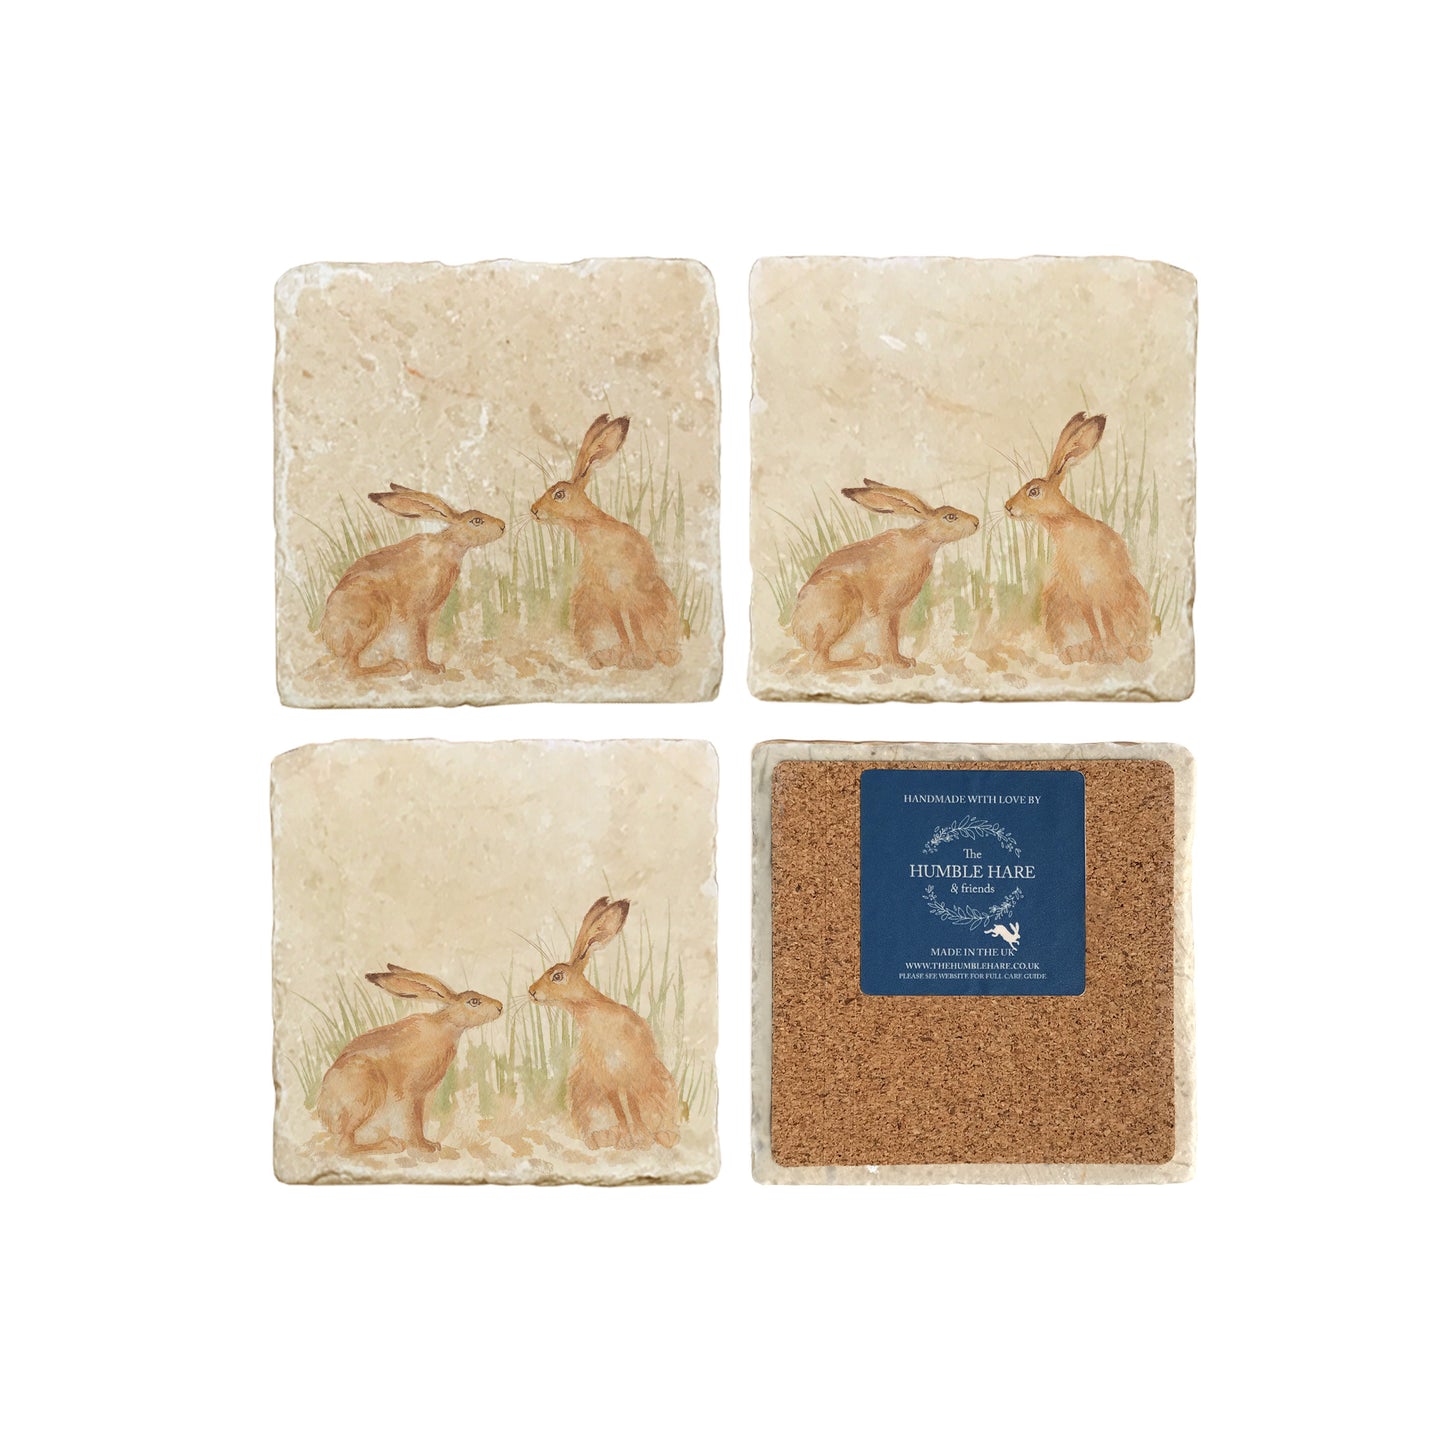 A set of four square marble coasters, featuring a watercolour design of two hares facing each other about to touch noses. One coaster is flipped to show that the coasters are backed with cork.